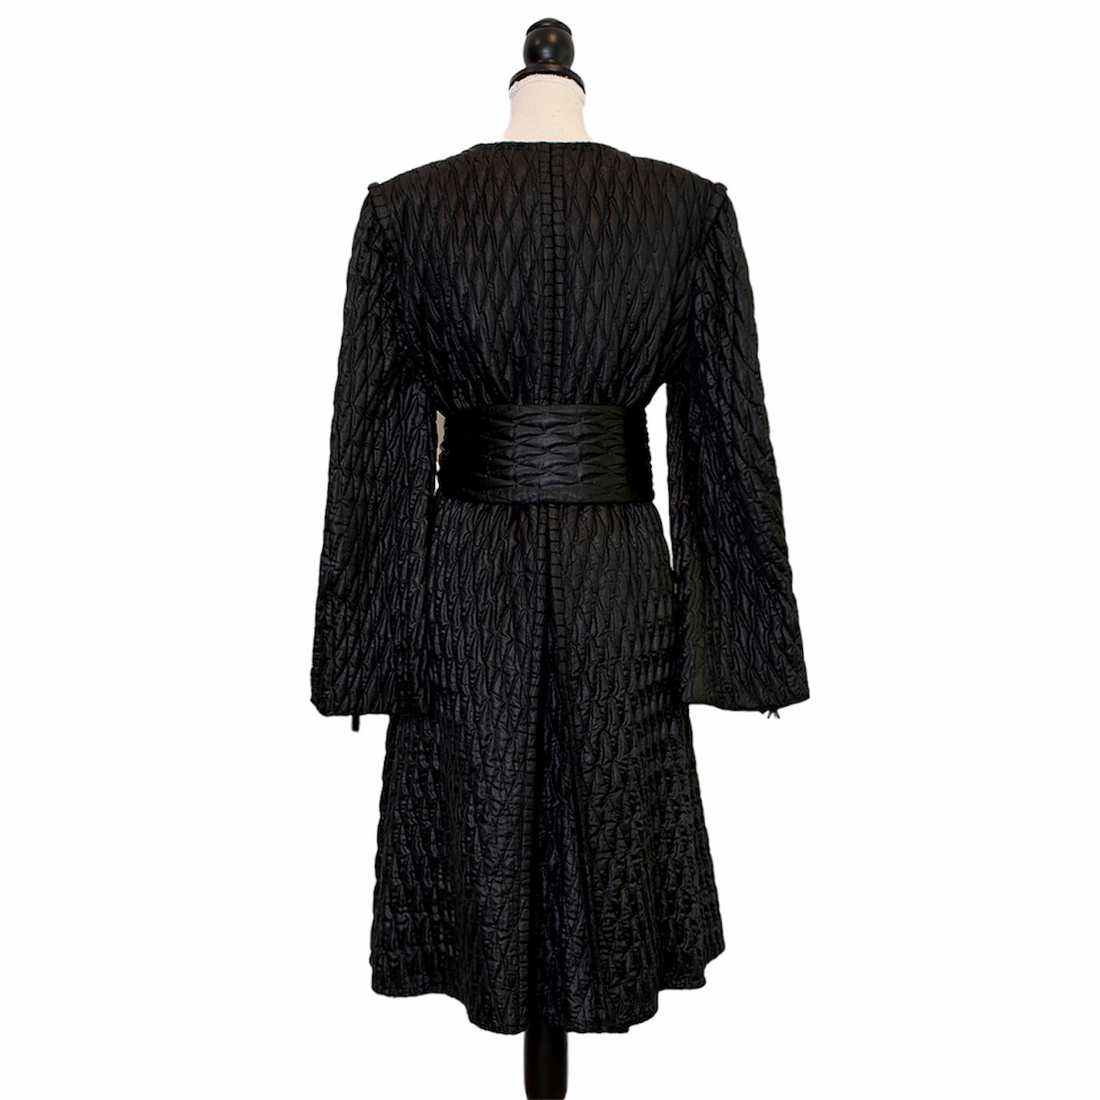 Giorgio Armani Unusual vintage quilted coat with zipper and wrap belt in oversize style